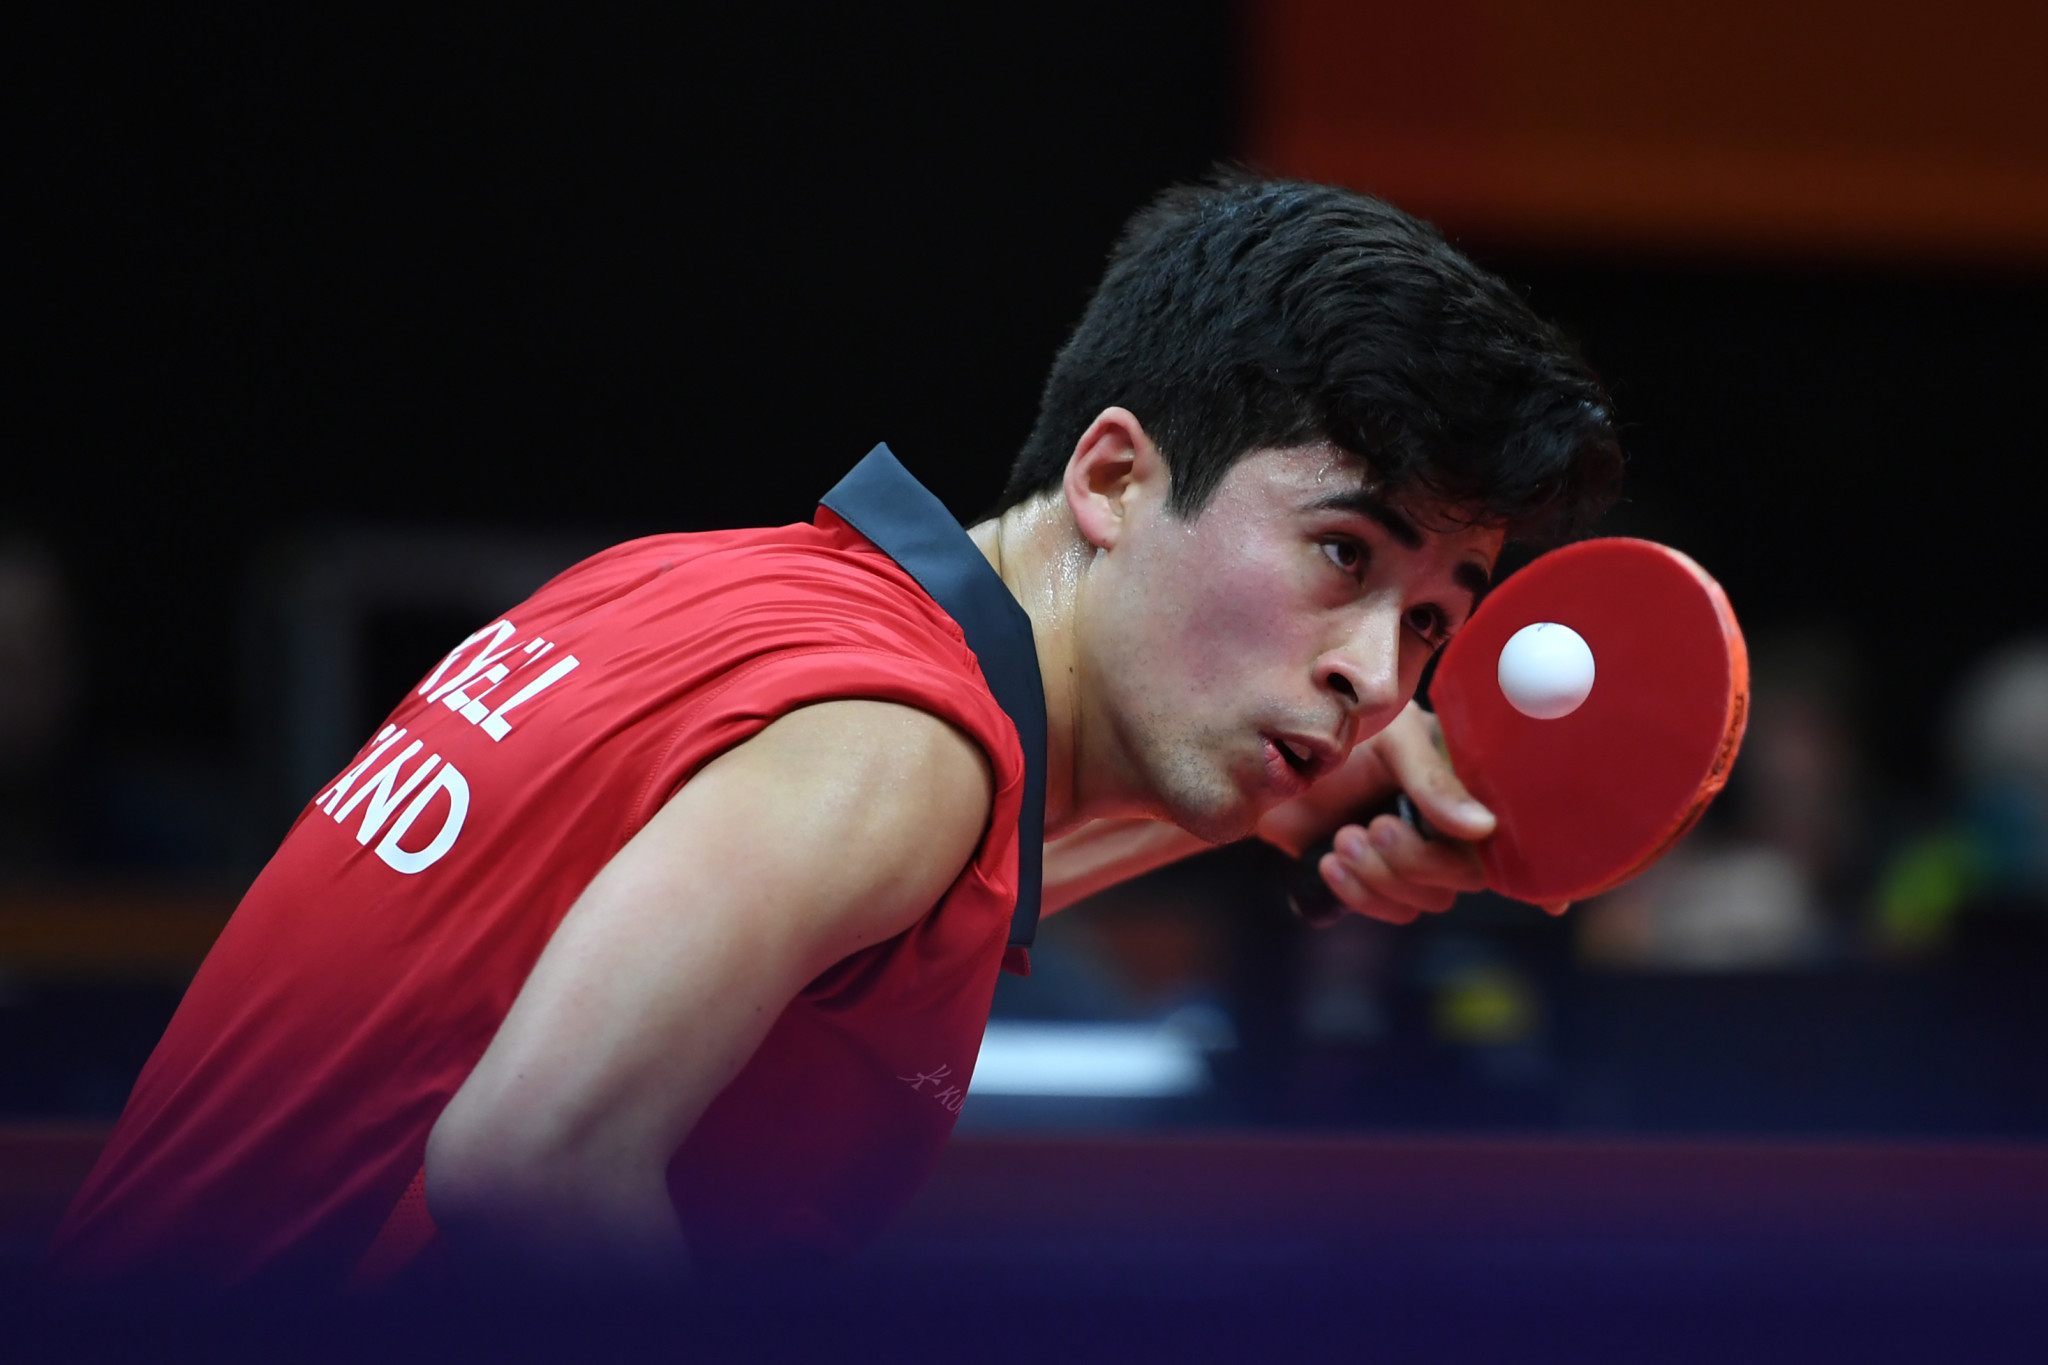 Two-time Paralympian Daybell retires from table tennis to focus on medical career